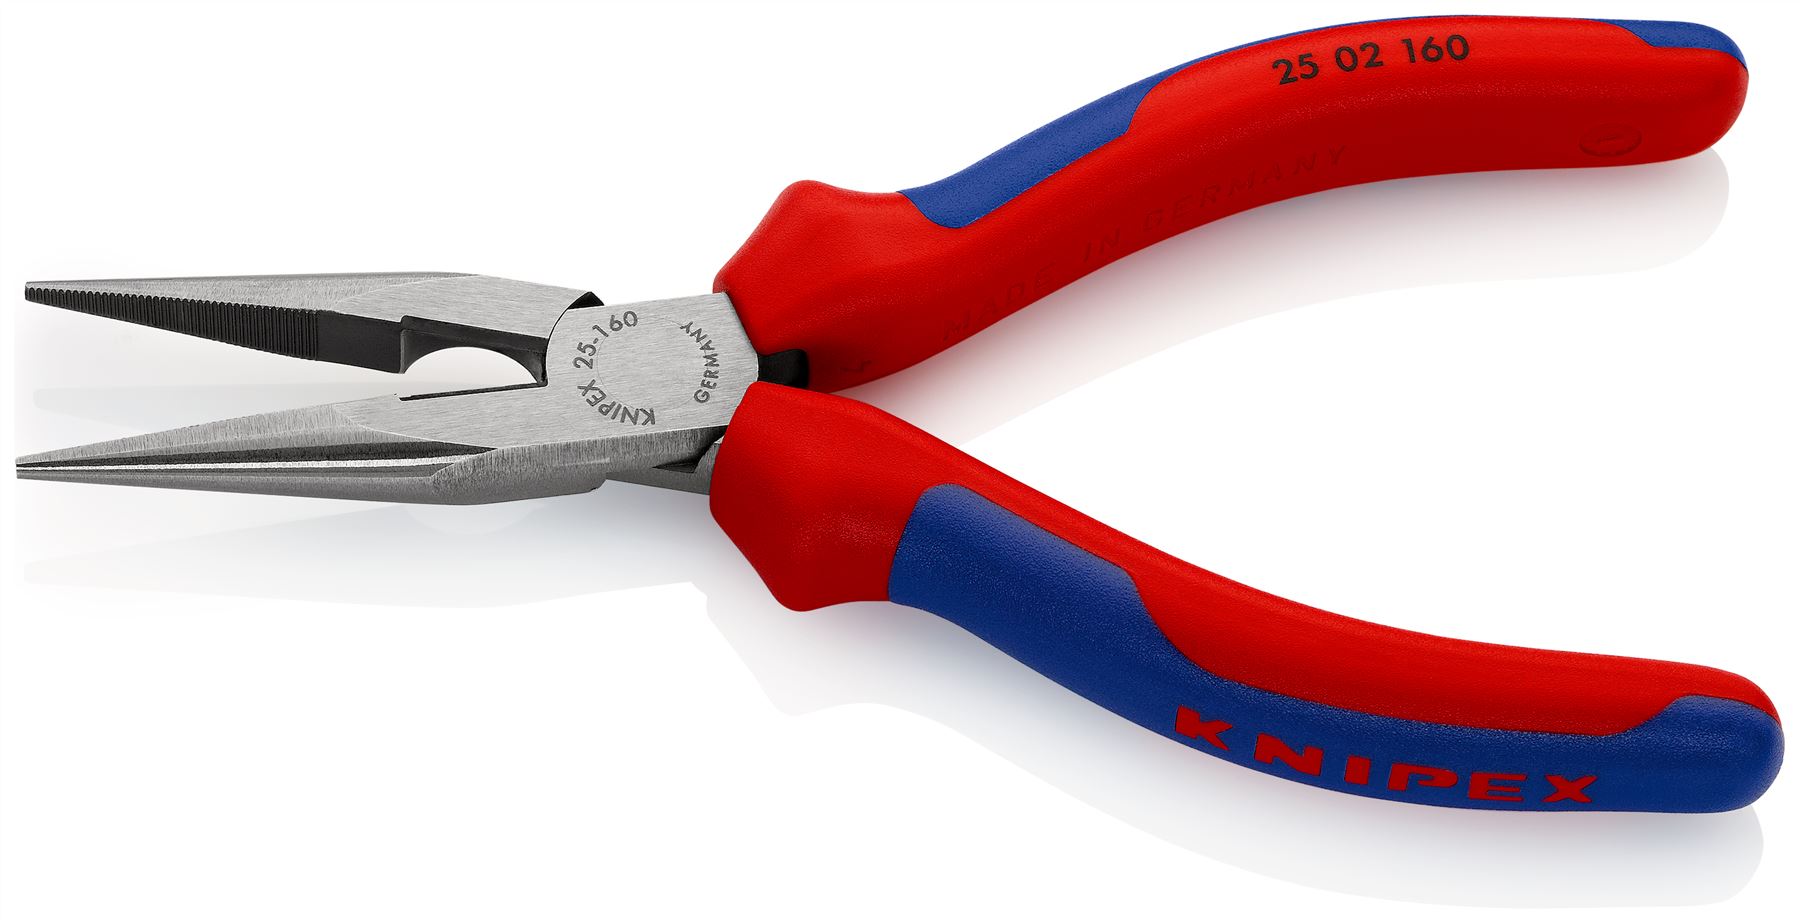 Knipex Snipe Nose Side Cutting Pliers 160mm Long Nose Radio Plier 25 02 160